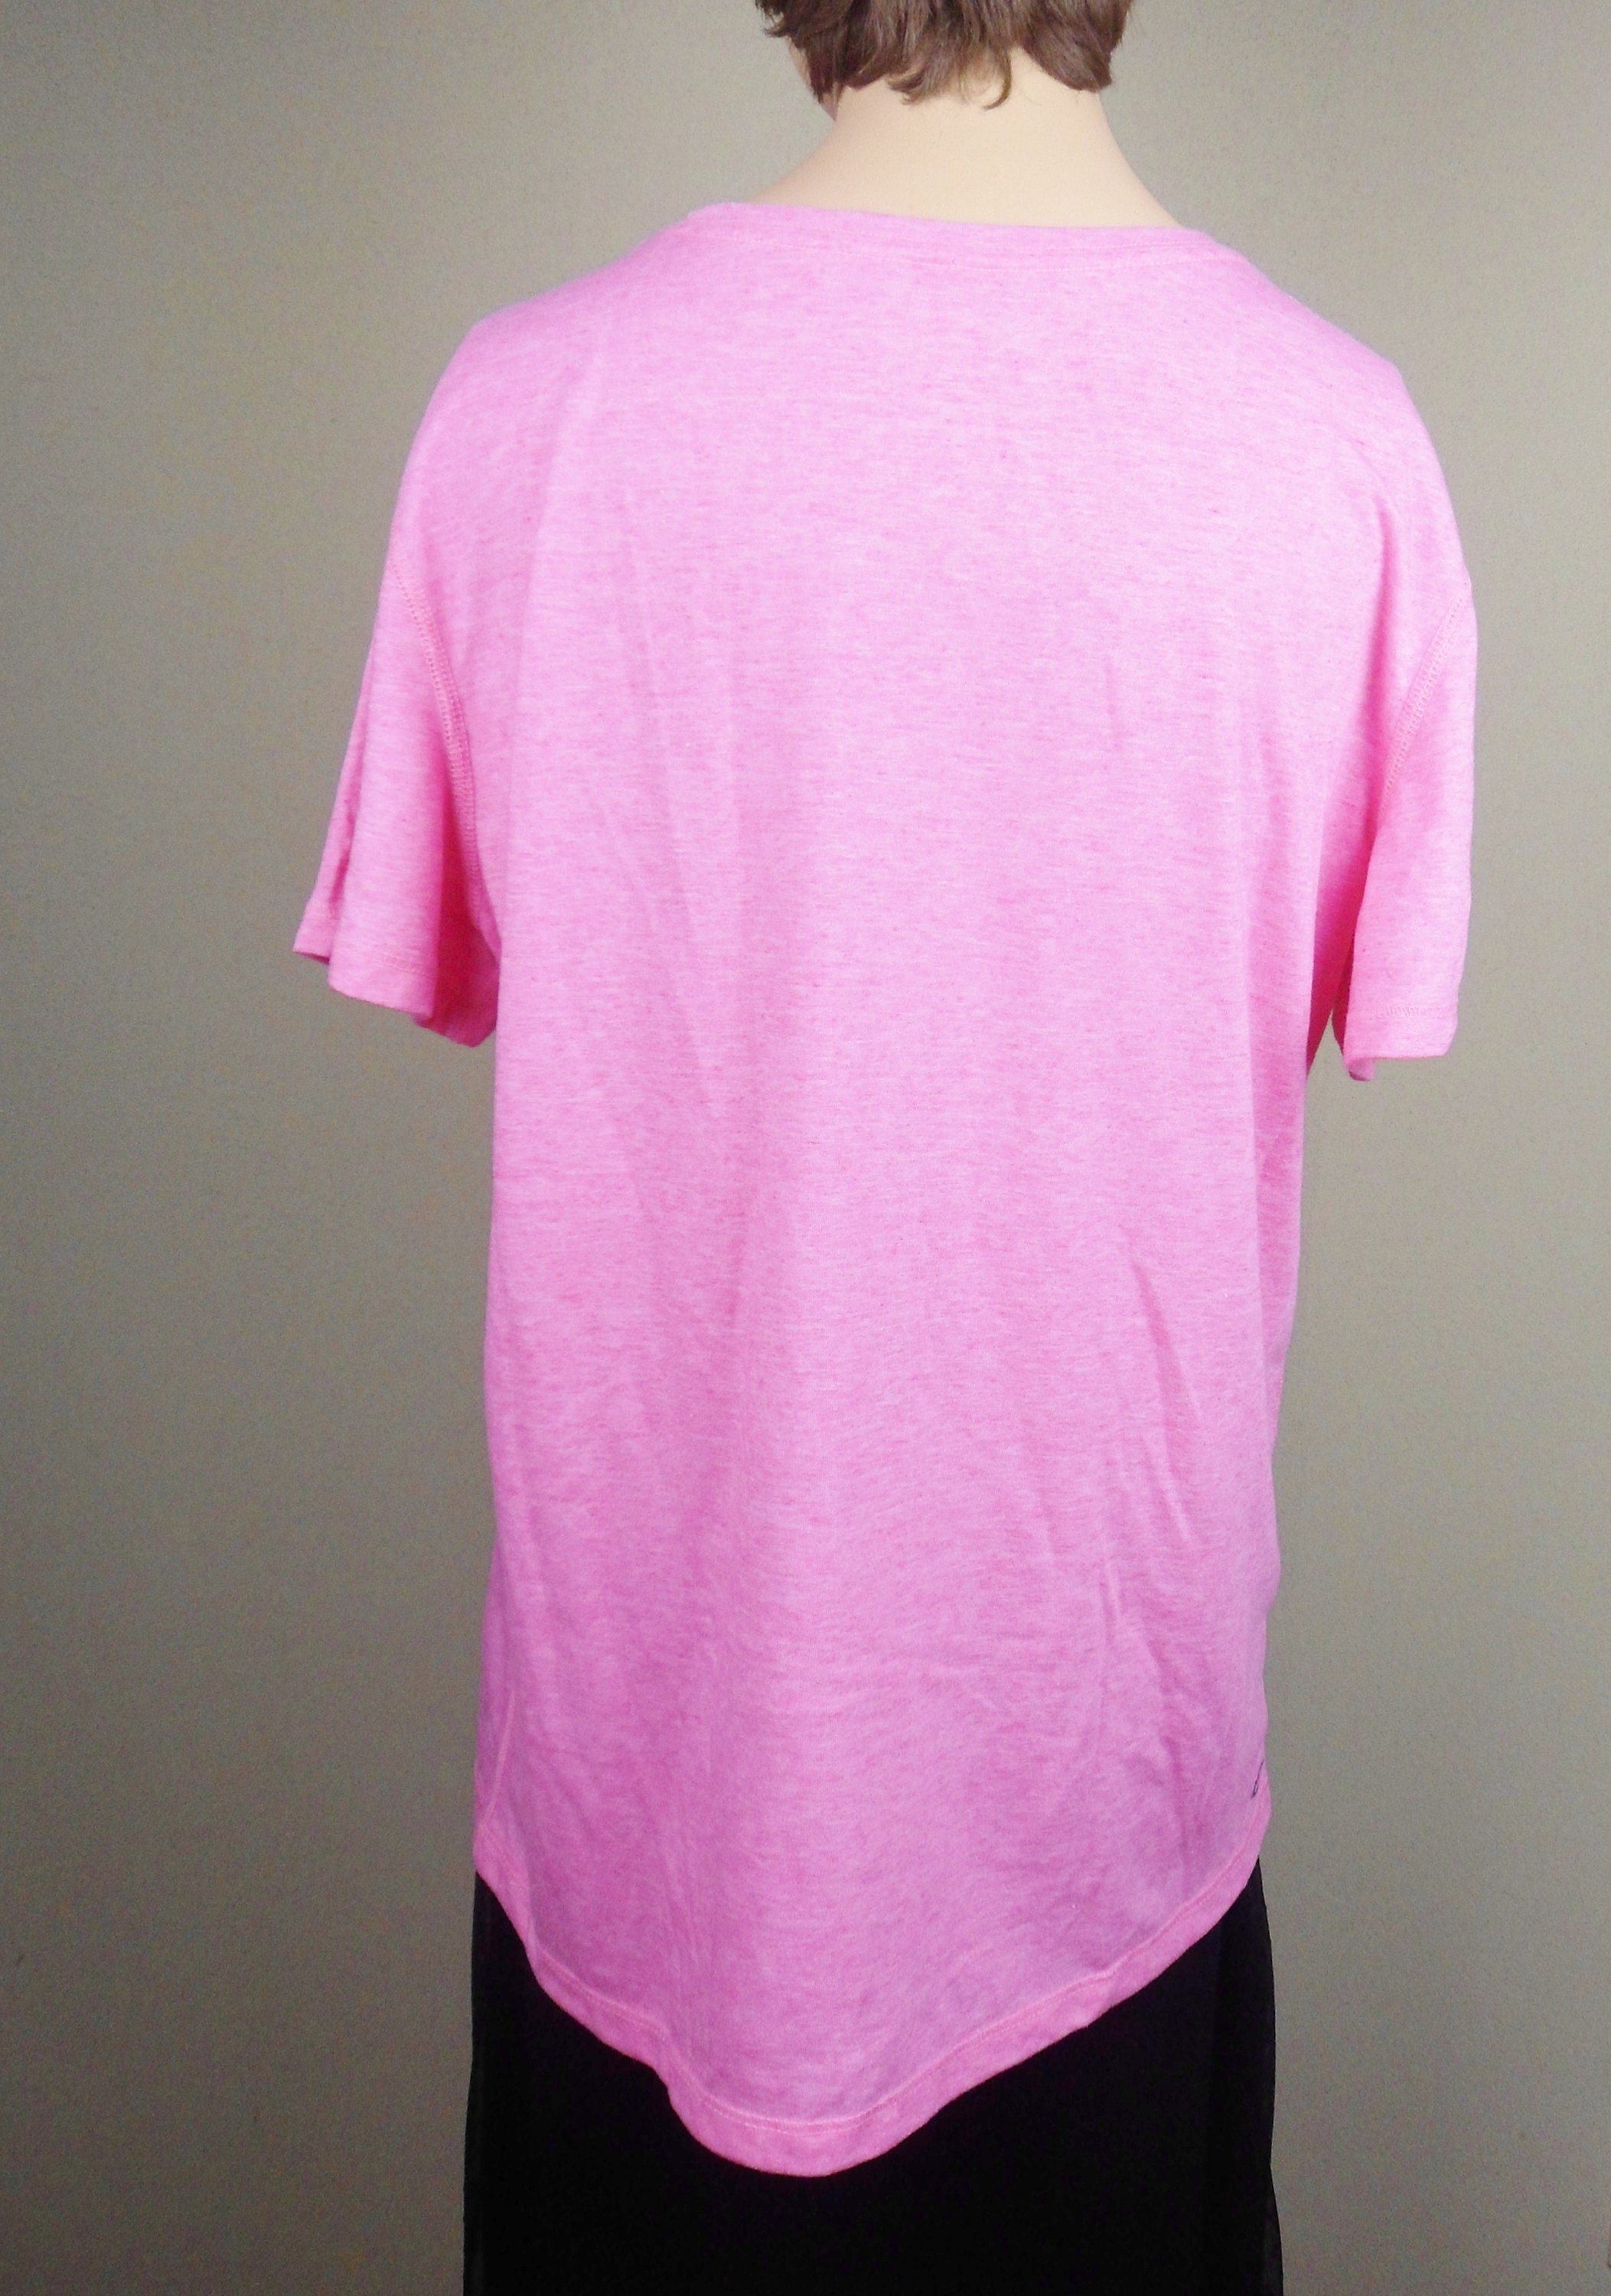 Pink Exercise Top, Danskin Now Semi Fitted Top, Size XL, Vintage Work Out  Clothing 